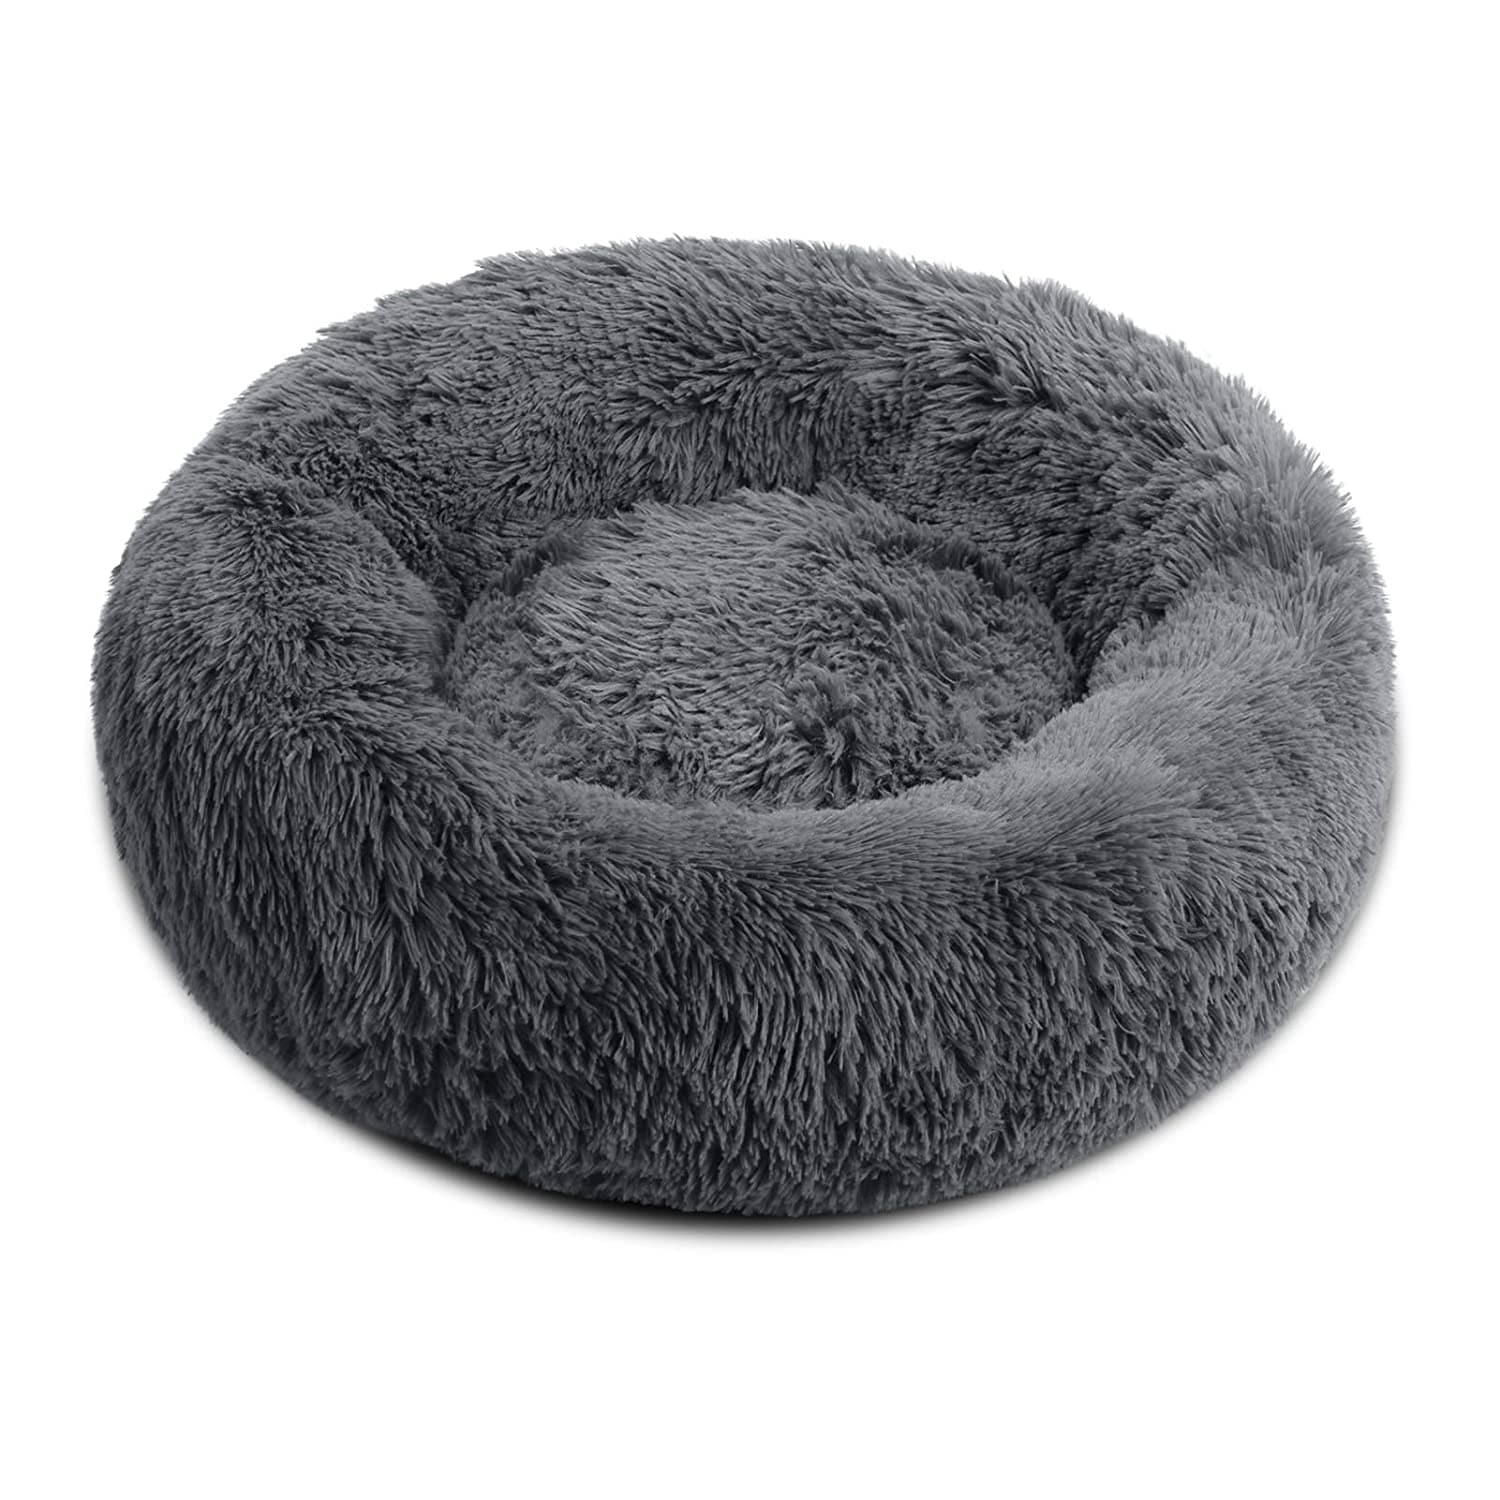 Donut Bed for Dogs (7236404215958)